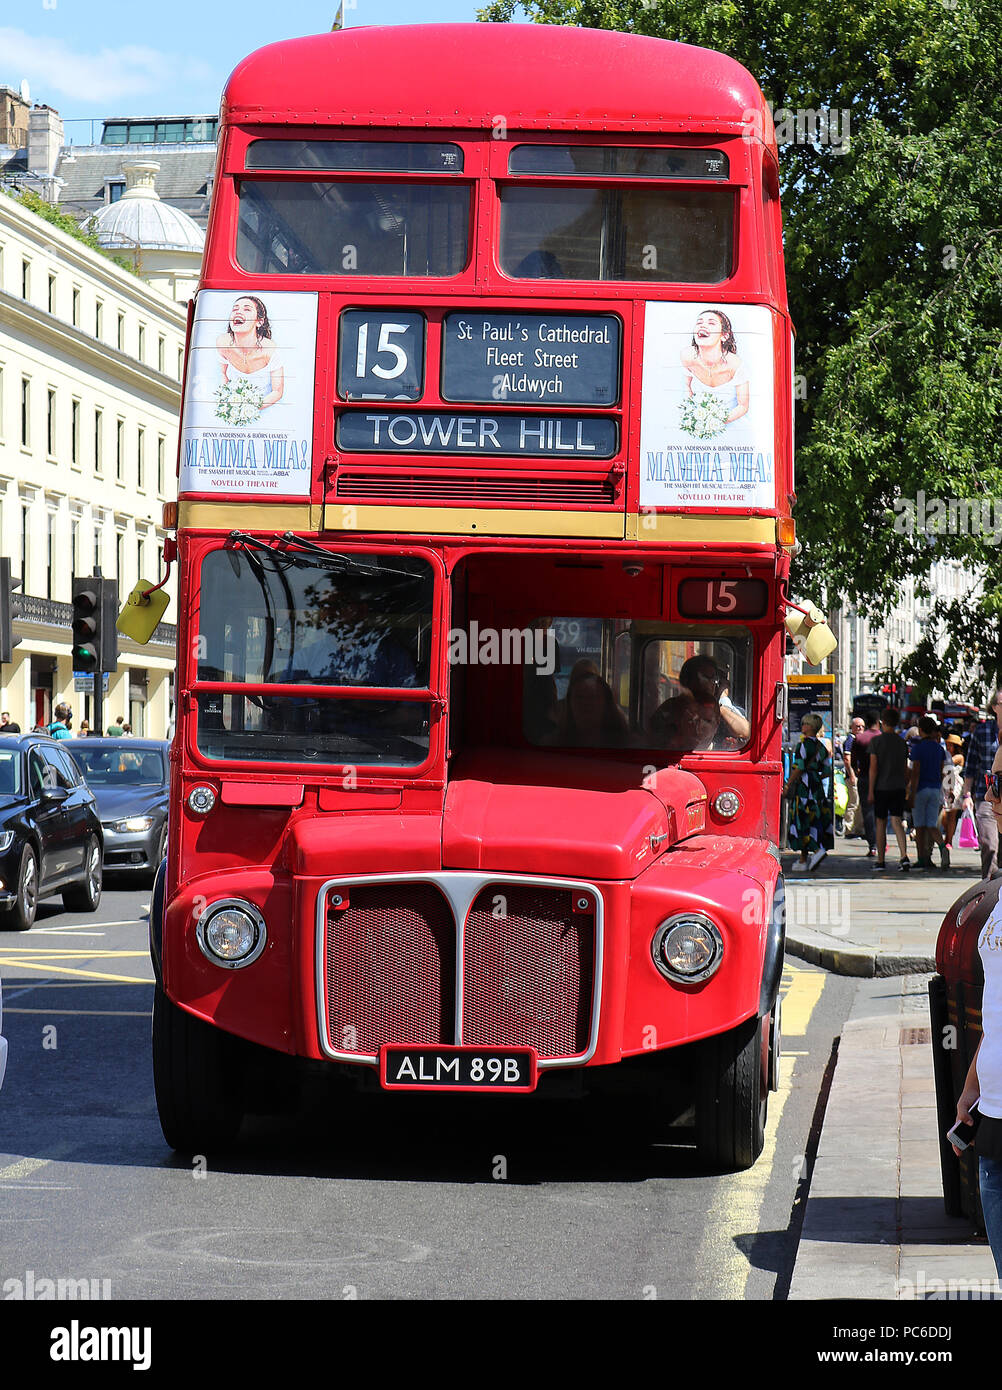 London Buses Routemaster Heritage Route 15, Central London, UK, 01 August  2018, London Buses Routemaster Heritage Route 15 runs between Trafalgar  Square and Tower Hill using 1960's AEC Routemasters. It is the